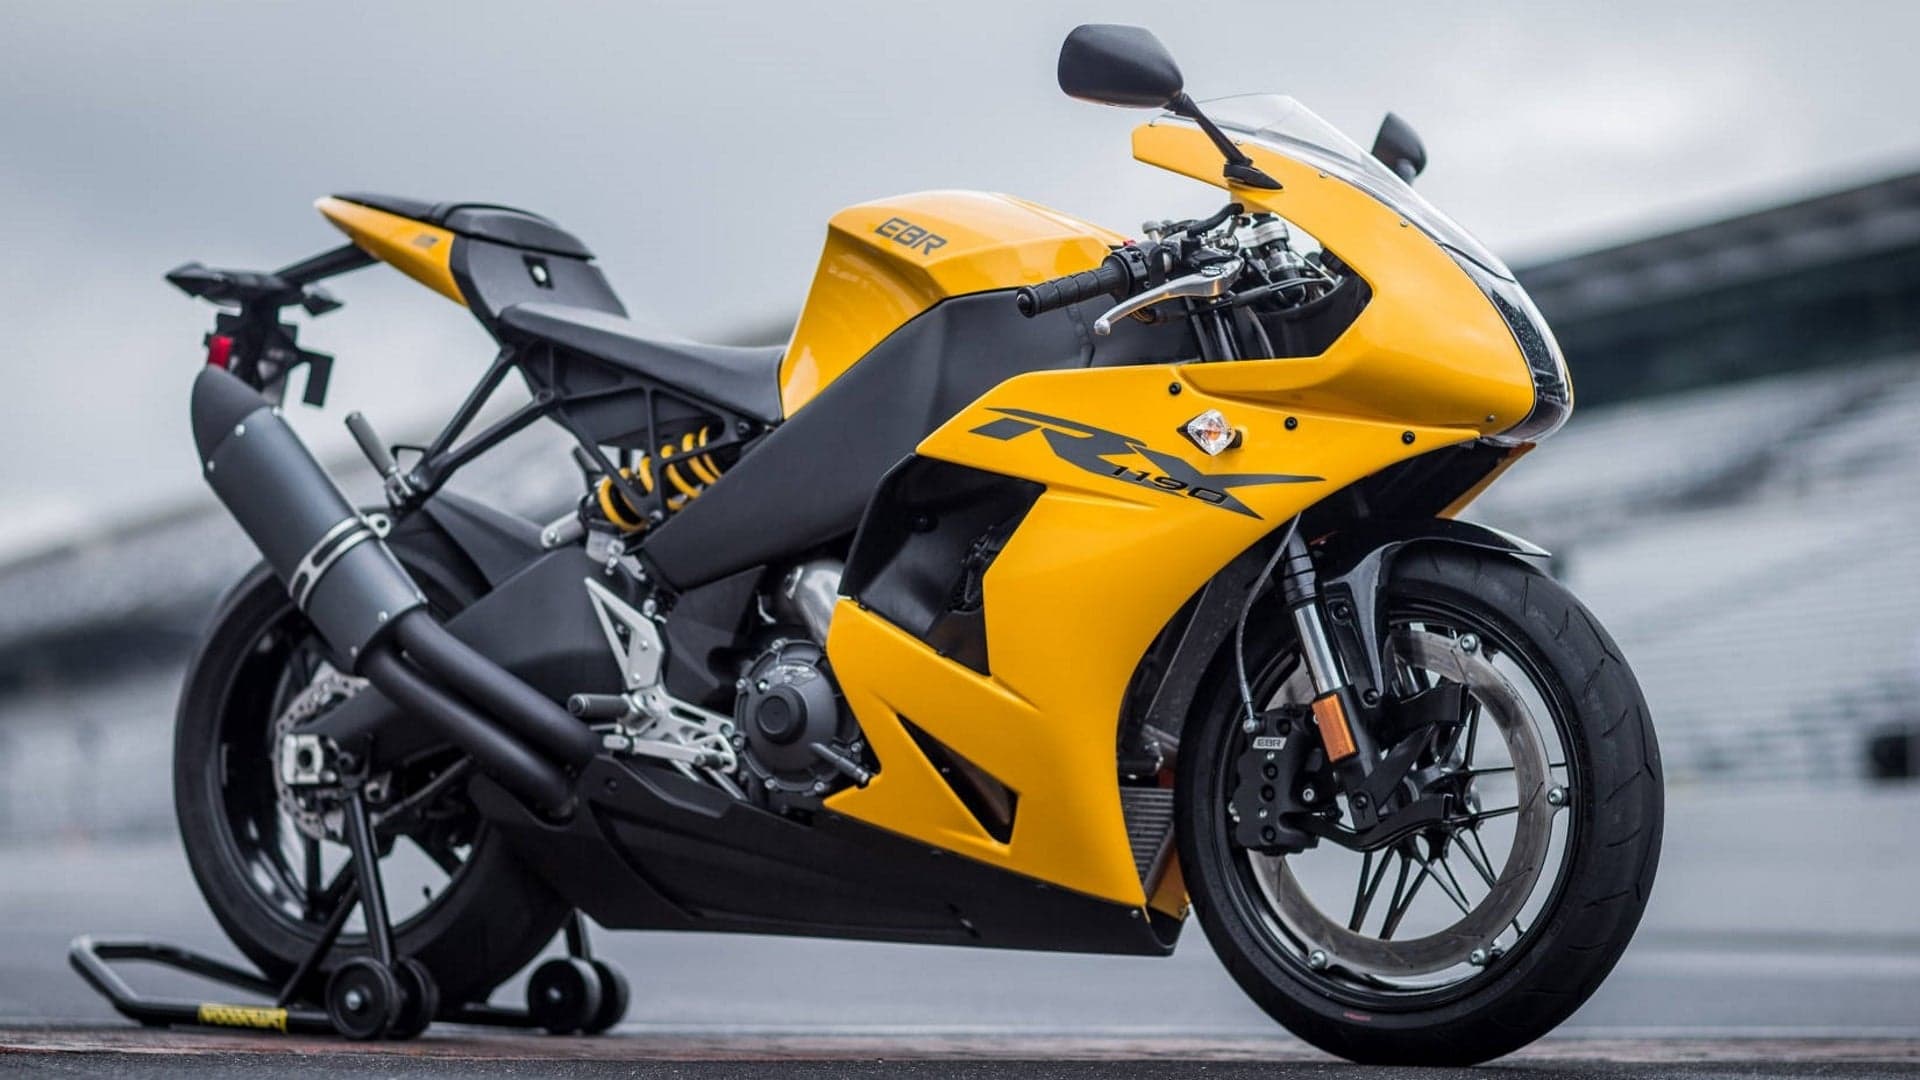 EBR Motorcycles Is Back at It Once Again, but in Very Limited Capacity